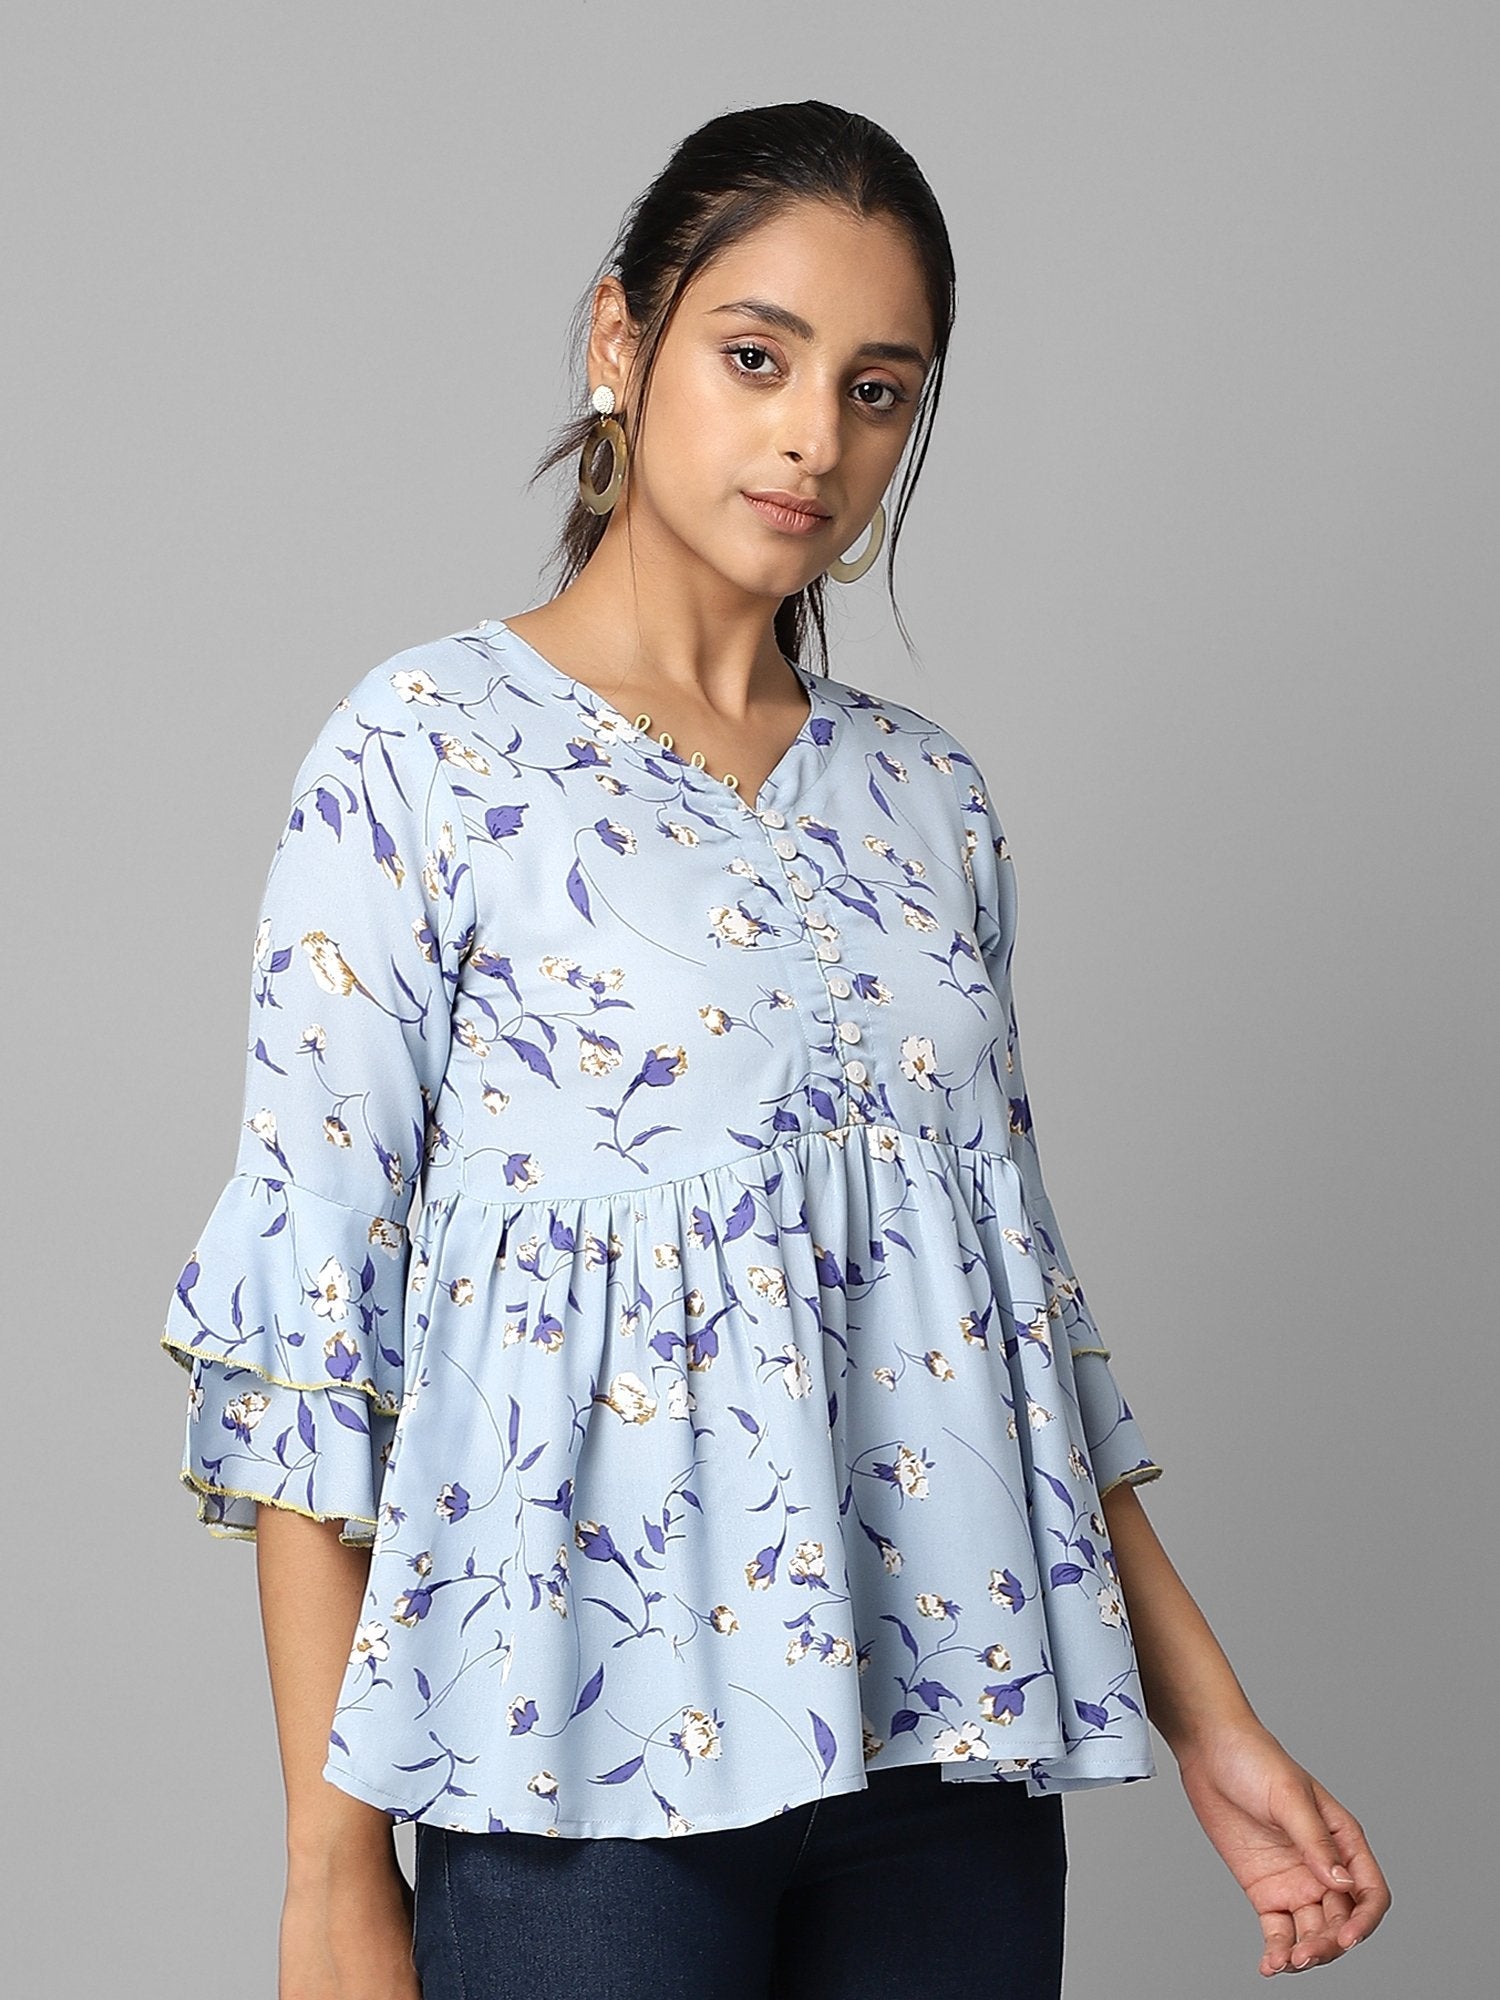 Women's Sky Blue Floral Printed Gathered Top - Azira